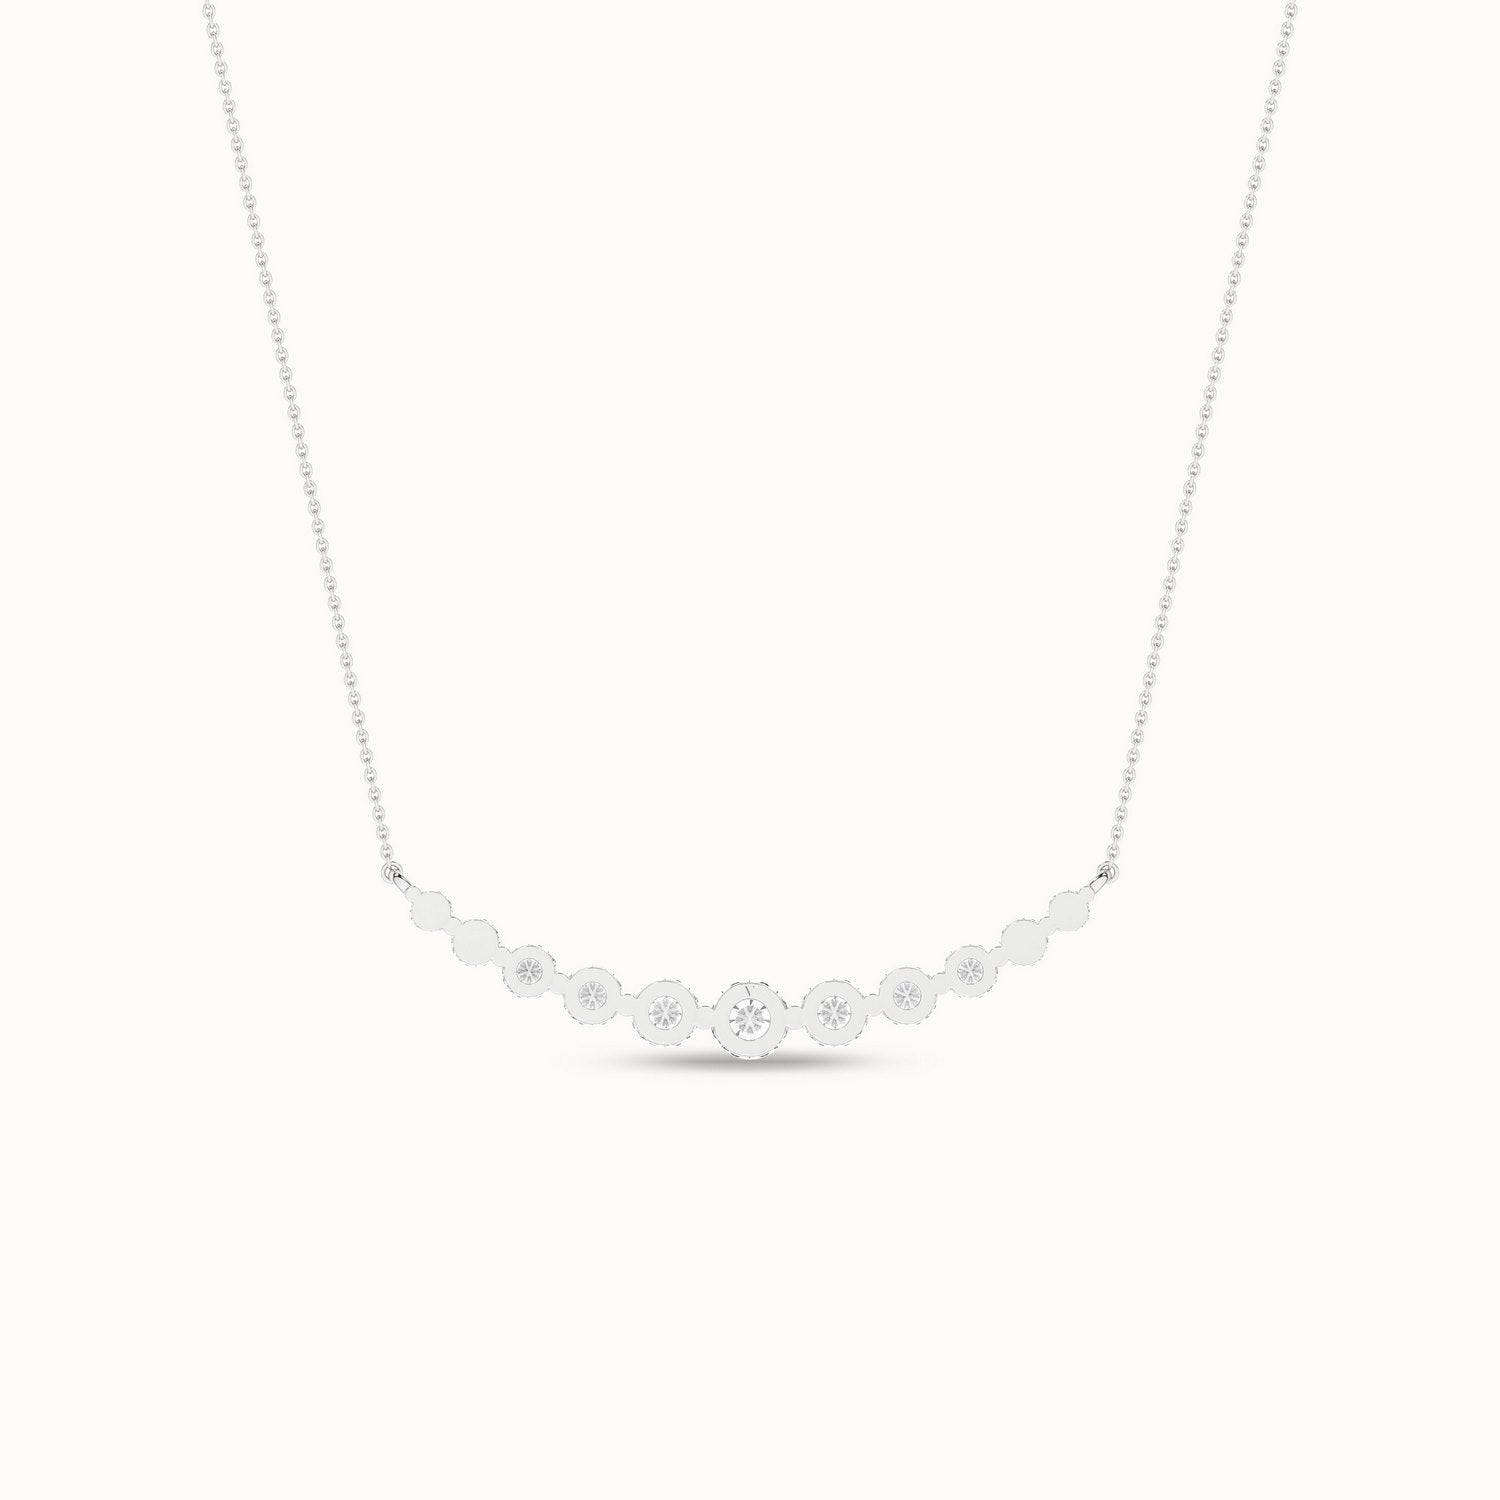 Captivating Necklace_Product Angle_1Ct. - 4